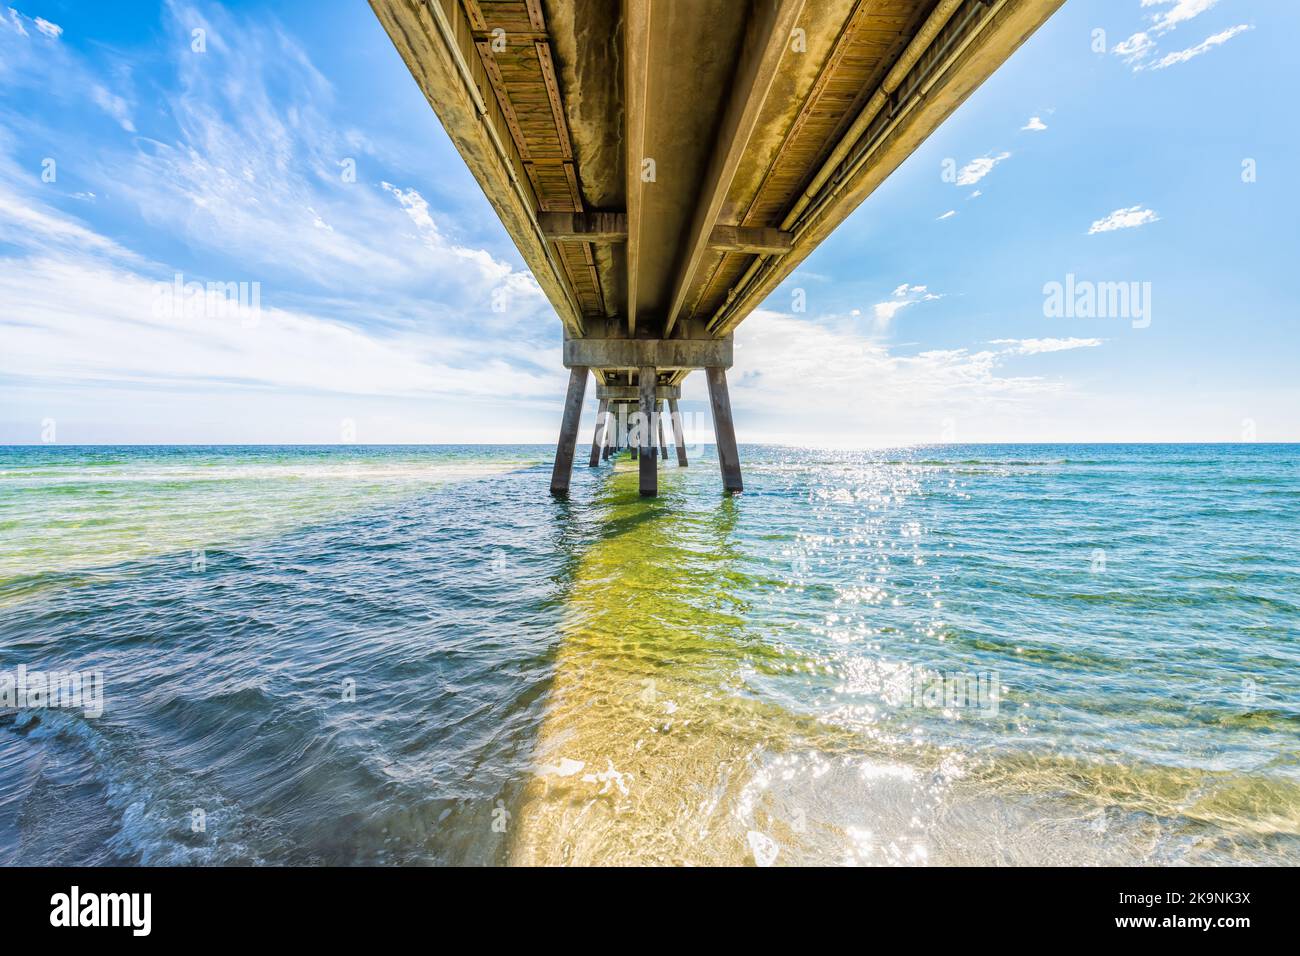 Under Okaloosa island fishing pier, Fort Walton Beach, Florida panhandle with wooden pillars, waves in Gulf of Mexico with sun path water reflection Stock Photo